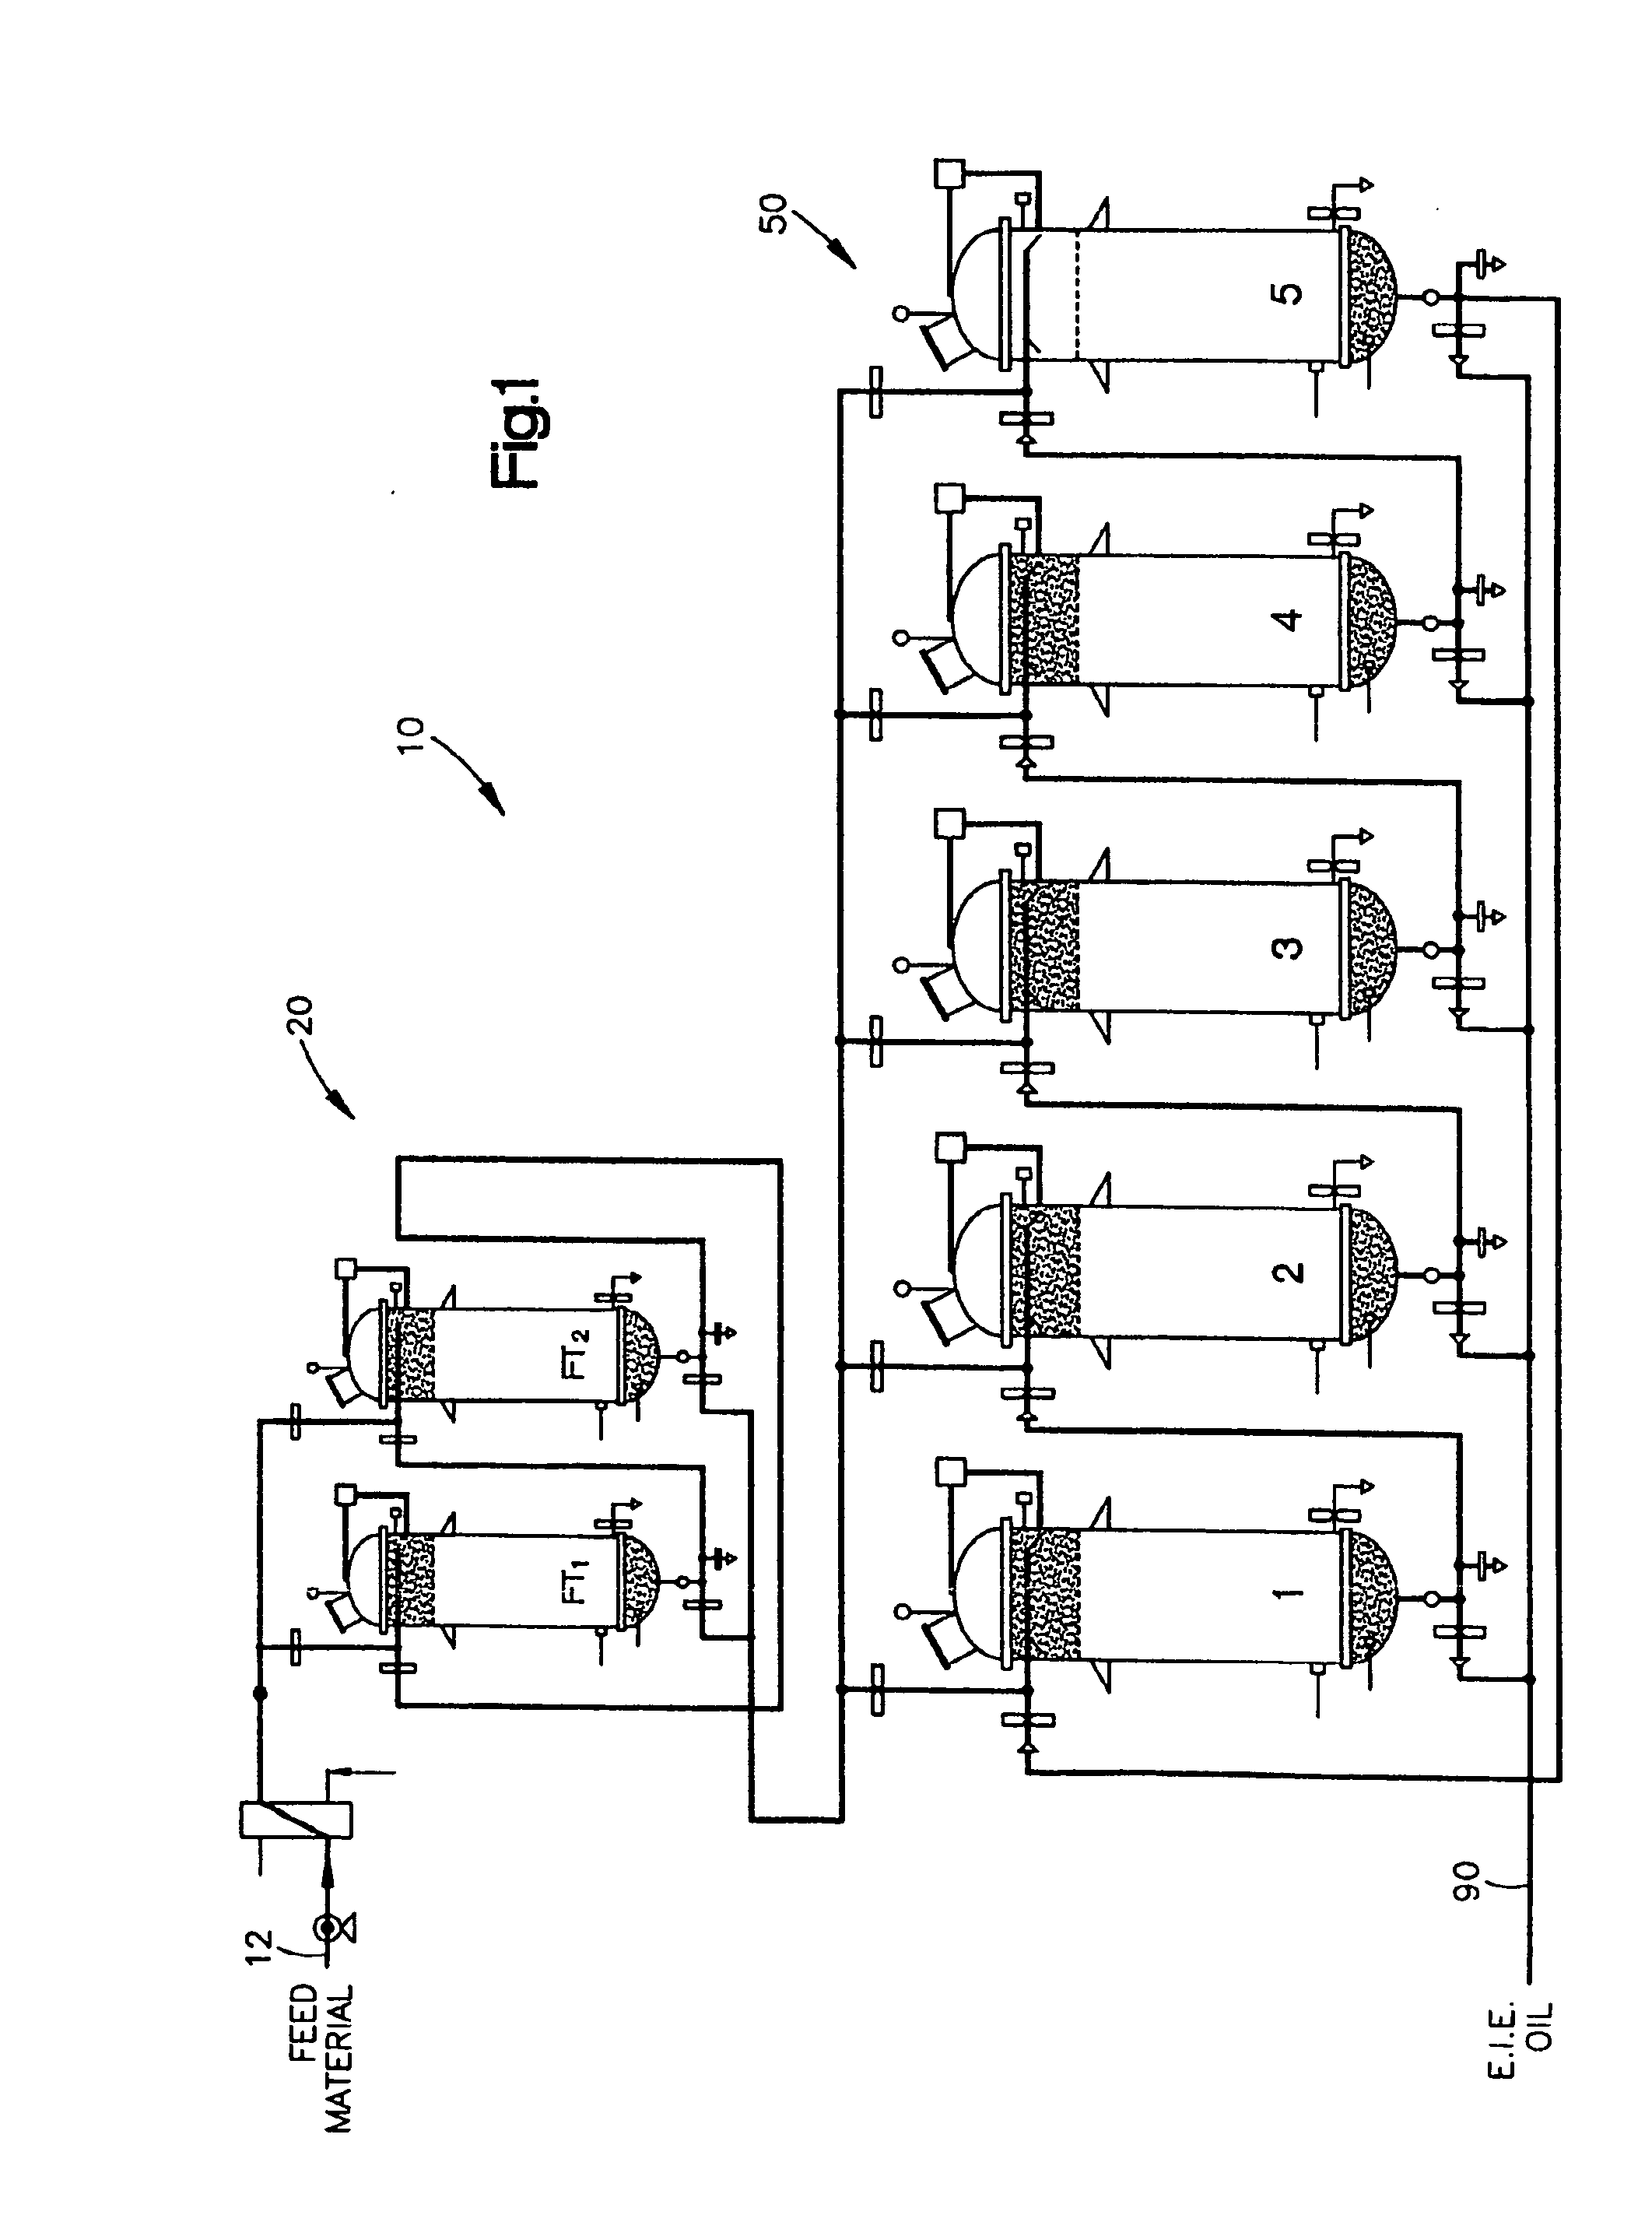 Continuous Process and Apparatus for Enzymatic Treatment of Lipids